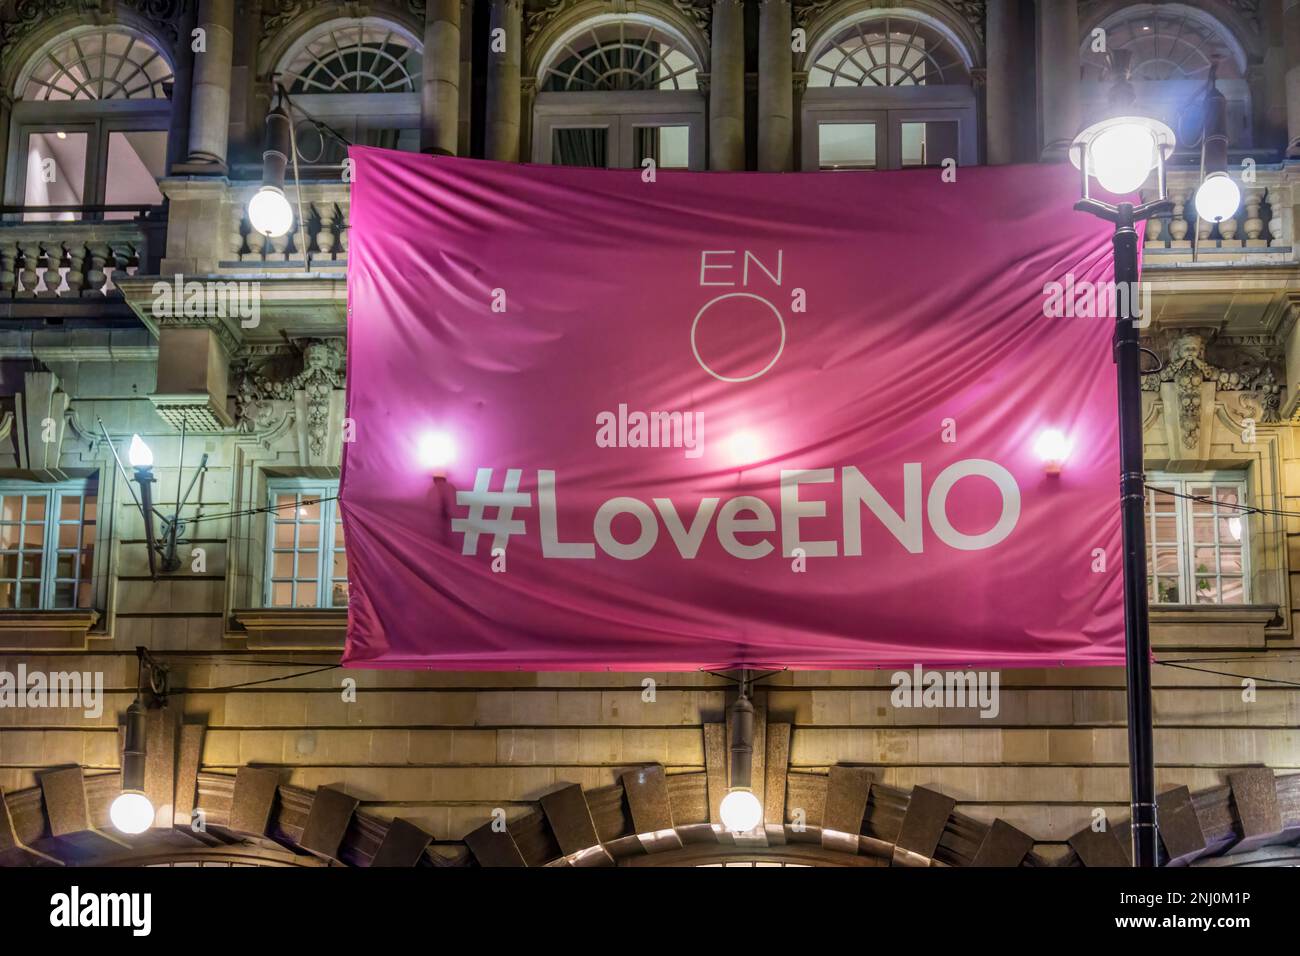 Love ENO banner outside the London Coliseum, the home of the English National Opera, in St Martins Lane. Stock Photo